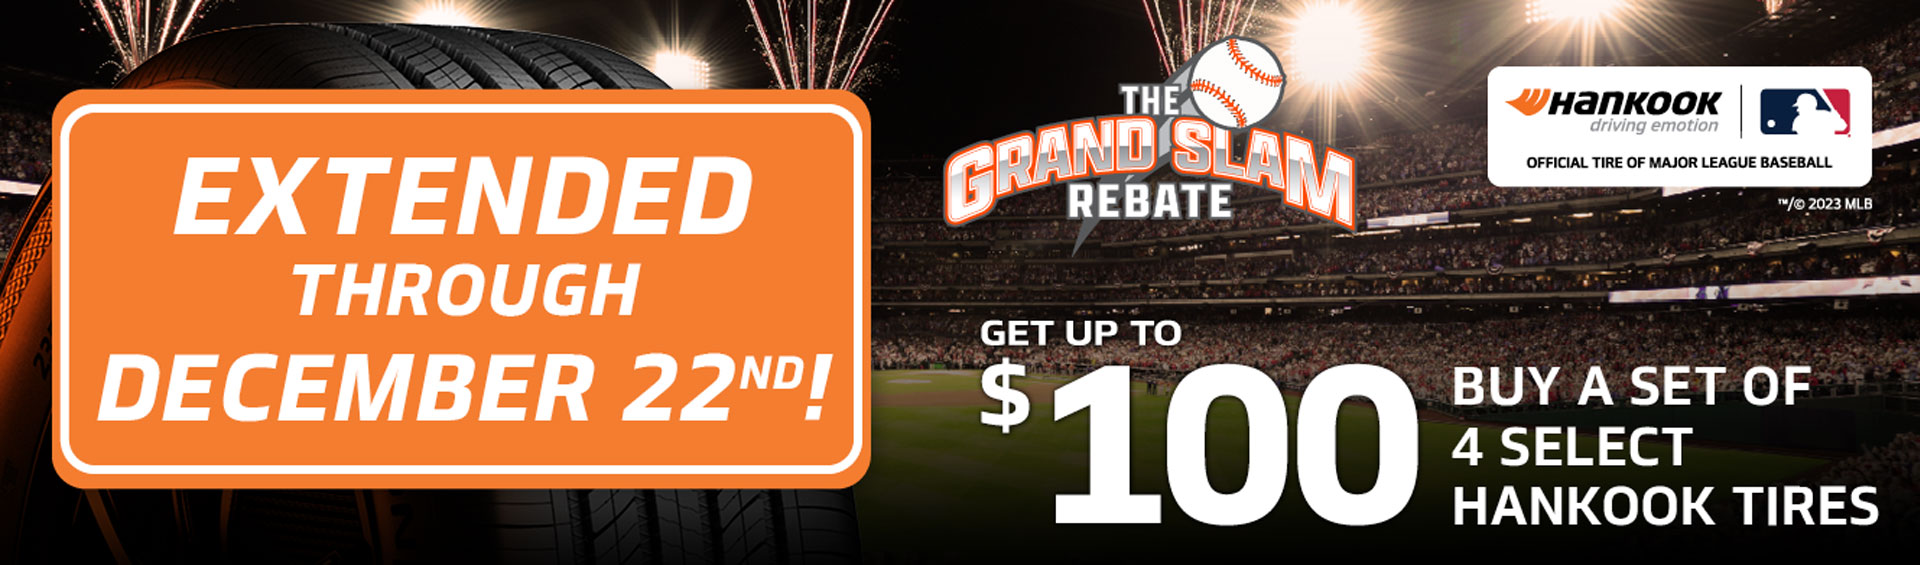 Hankook Tire Offers Savings of Up to $100 with Grand Slam Rebate
